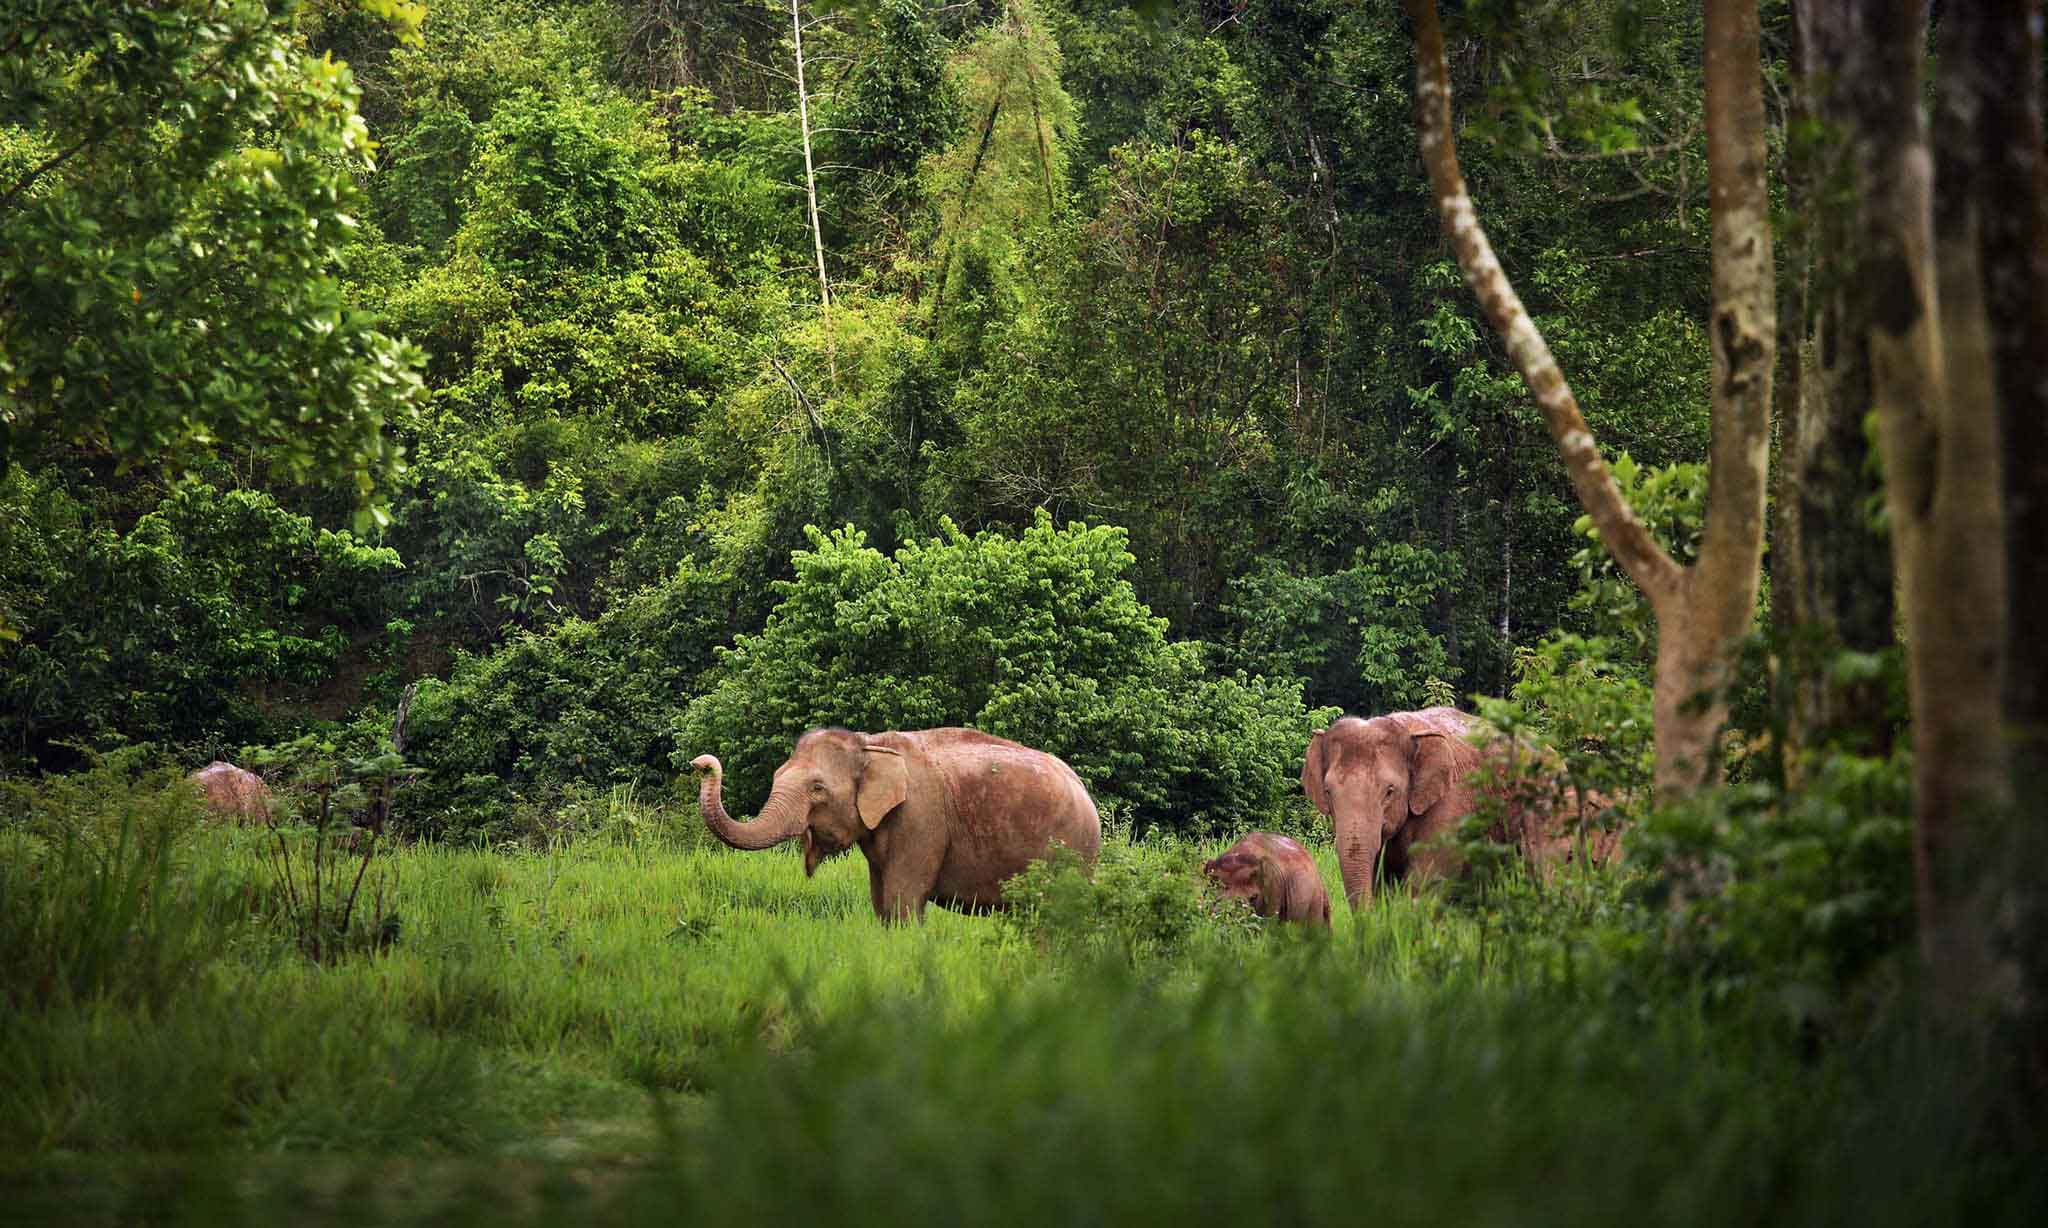 a herd of elephant in the elephant sanctuary surrounded by the jungle